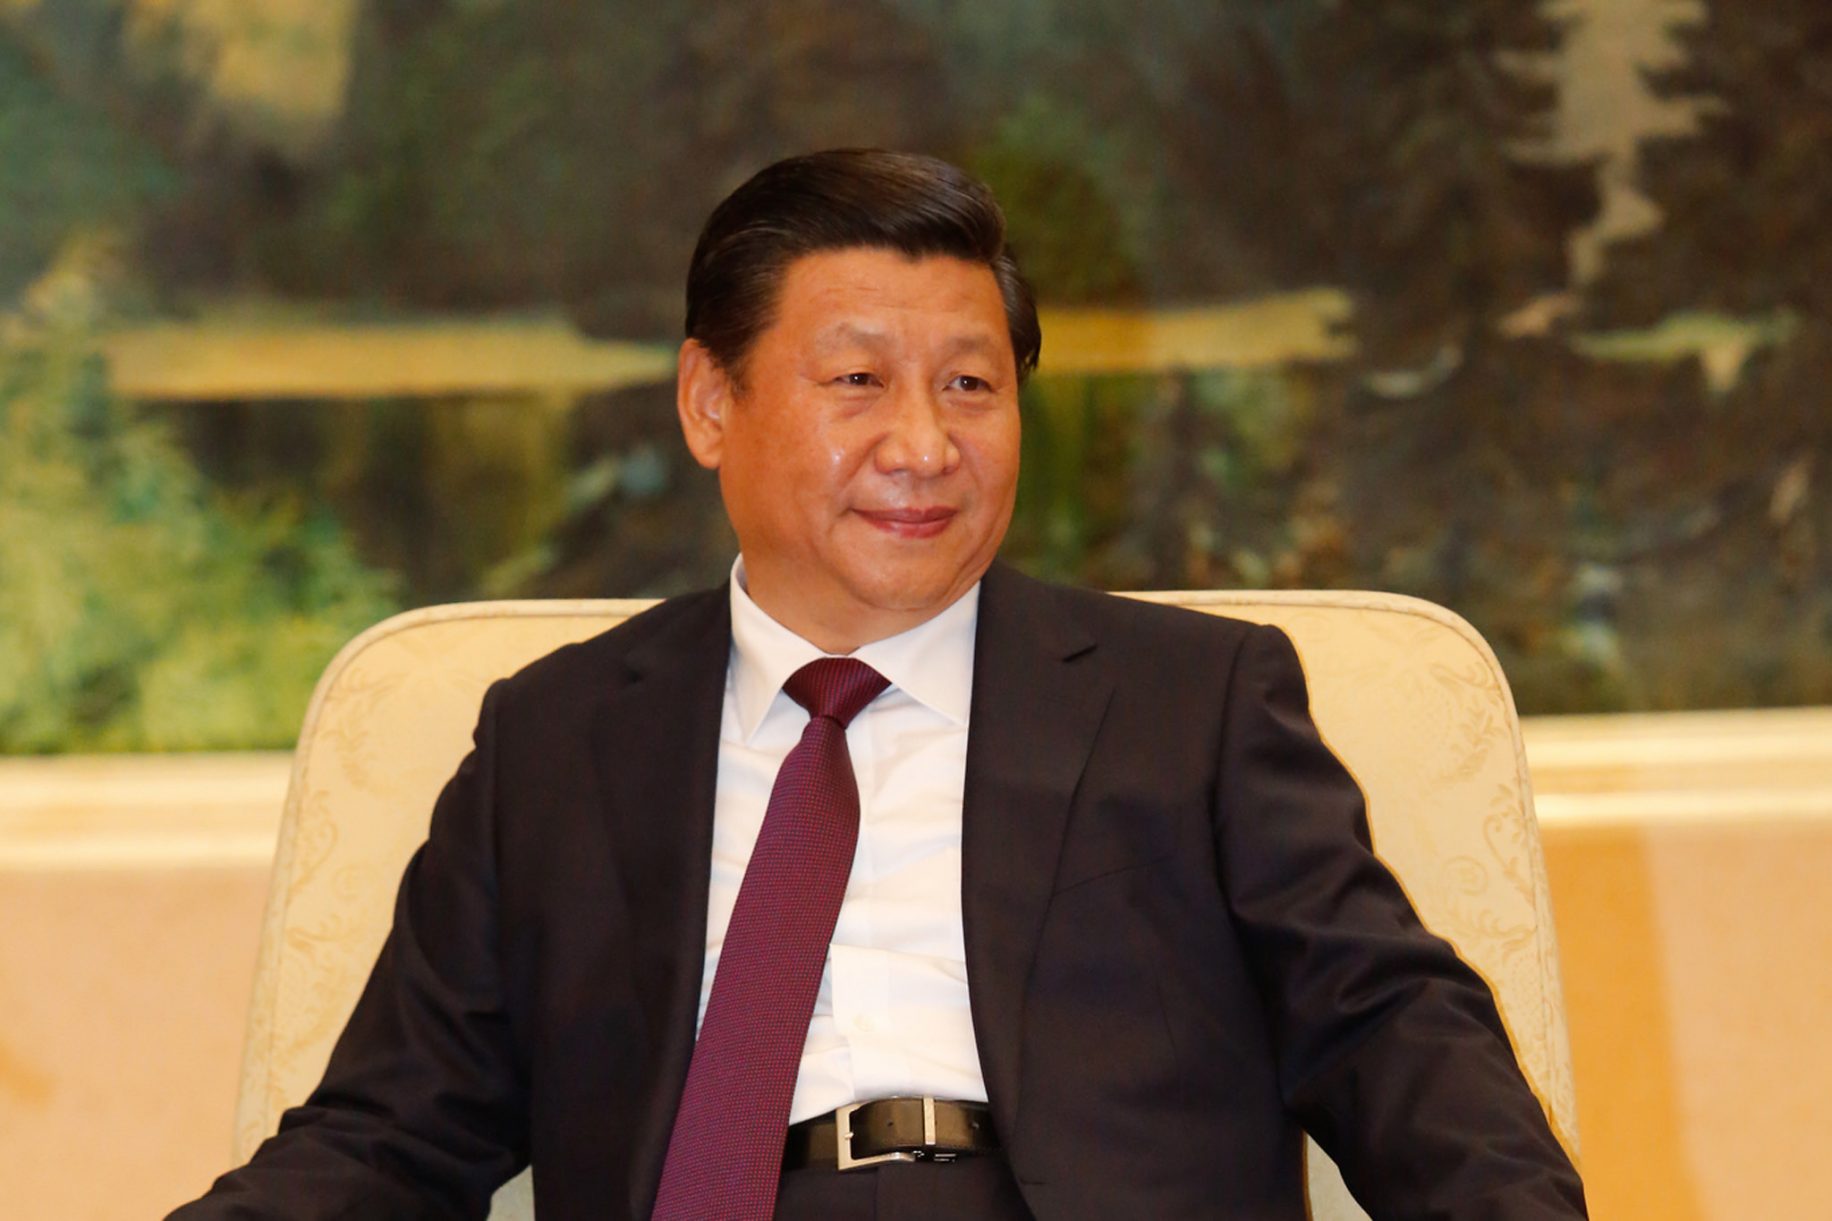 Court in China's Guangdong jails 24 over posts on Xi Jinping's family